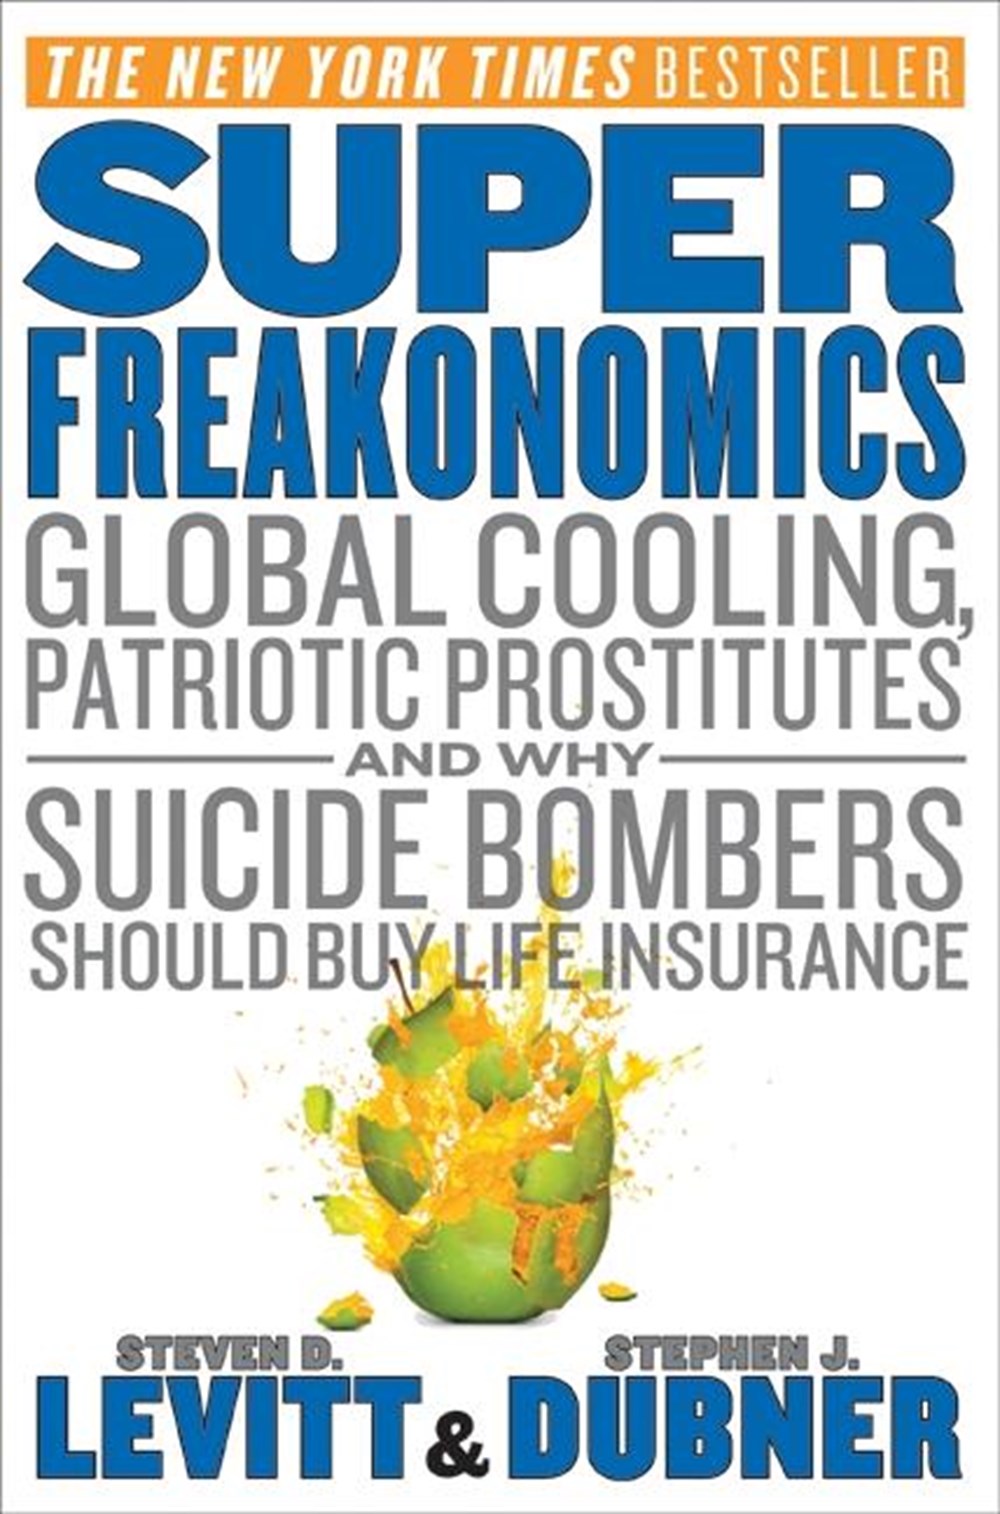 Superfreakonomics: Global Cooling, Patriotic Prostitutes, and Why Suicide Bombers Should Buy Life In